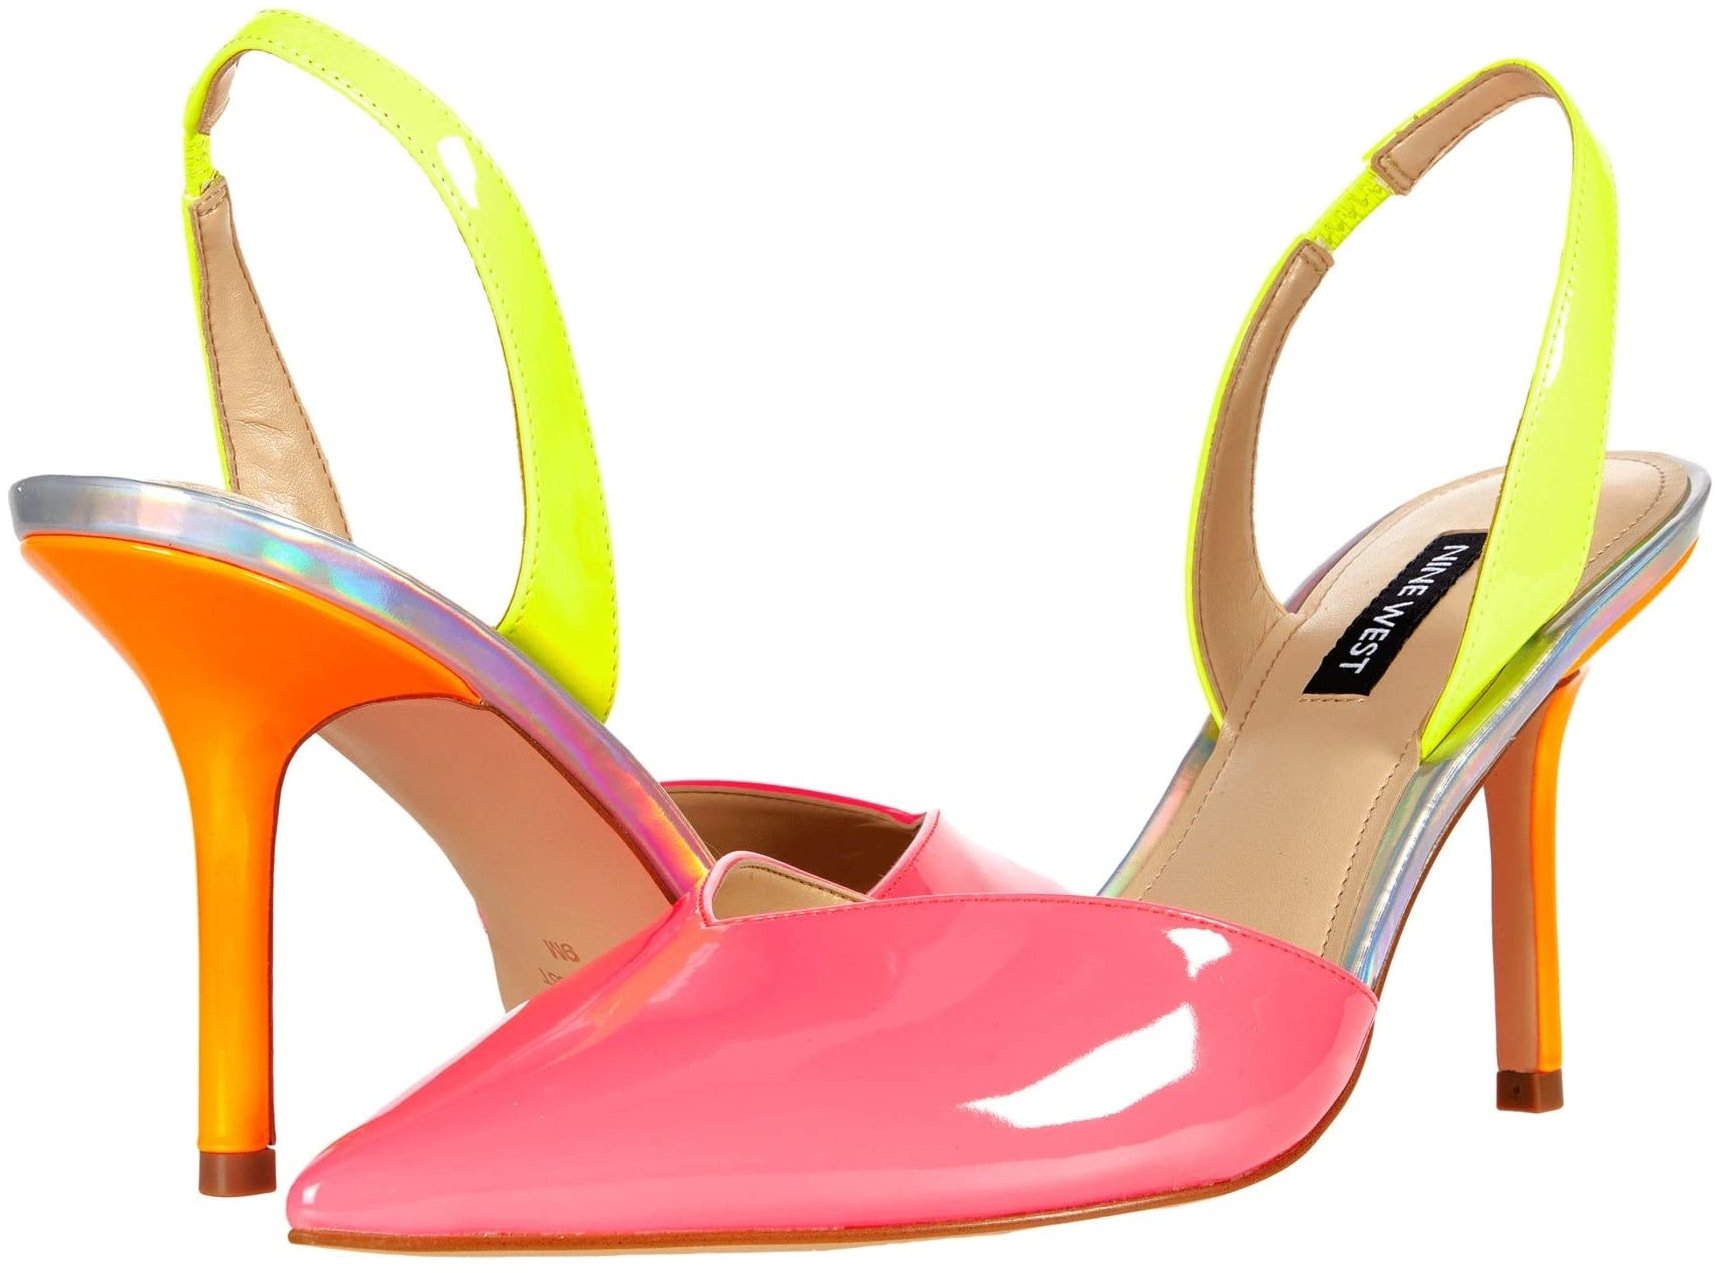 Your outfit will get a pop of color with Nine West's hot pink and yellow patent Hello pointed toe stiletto heels